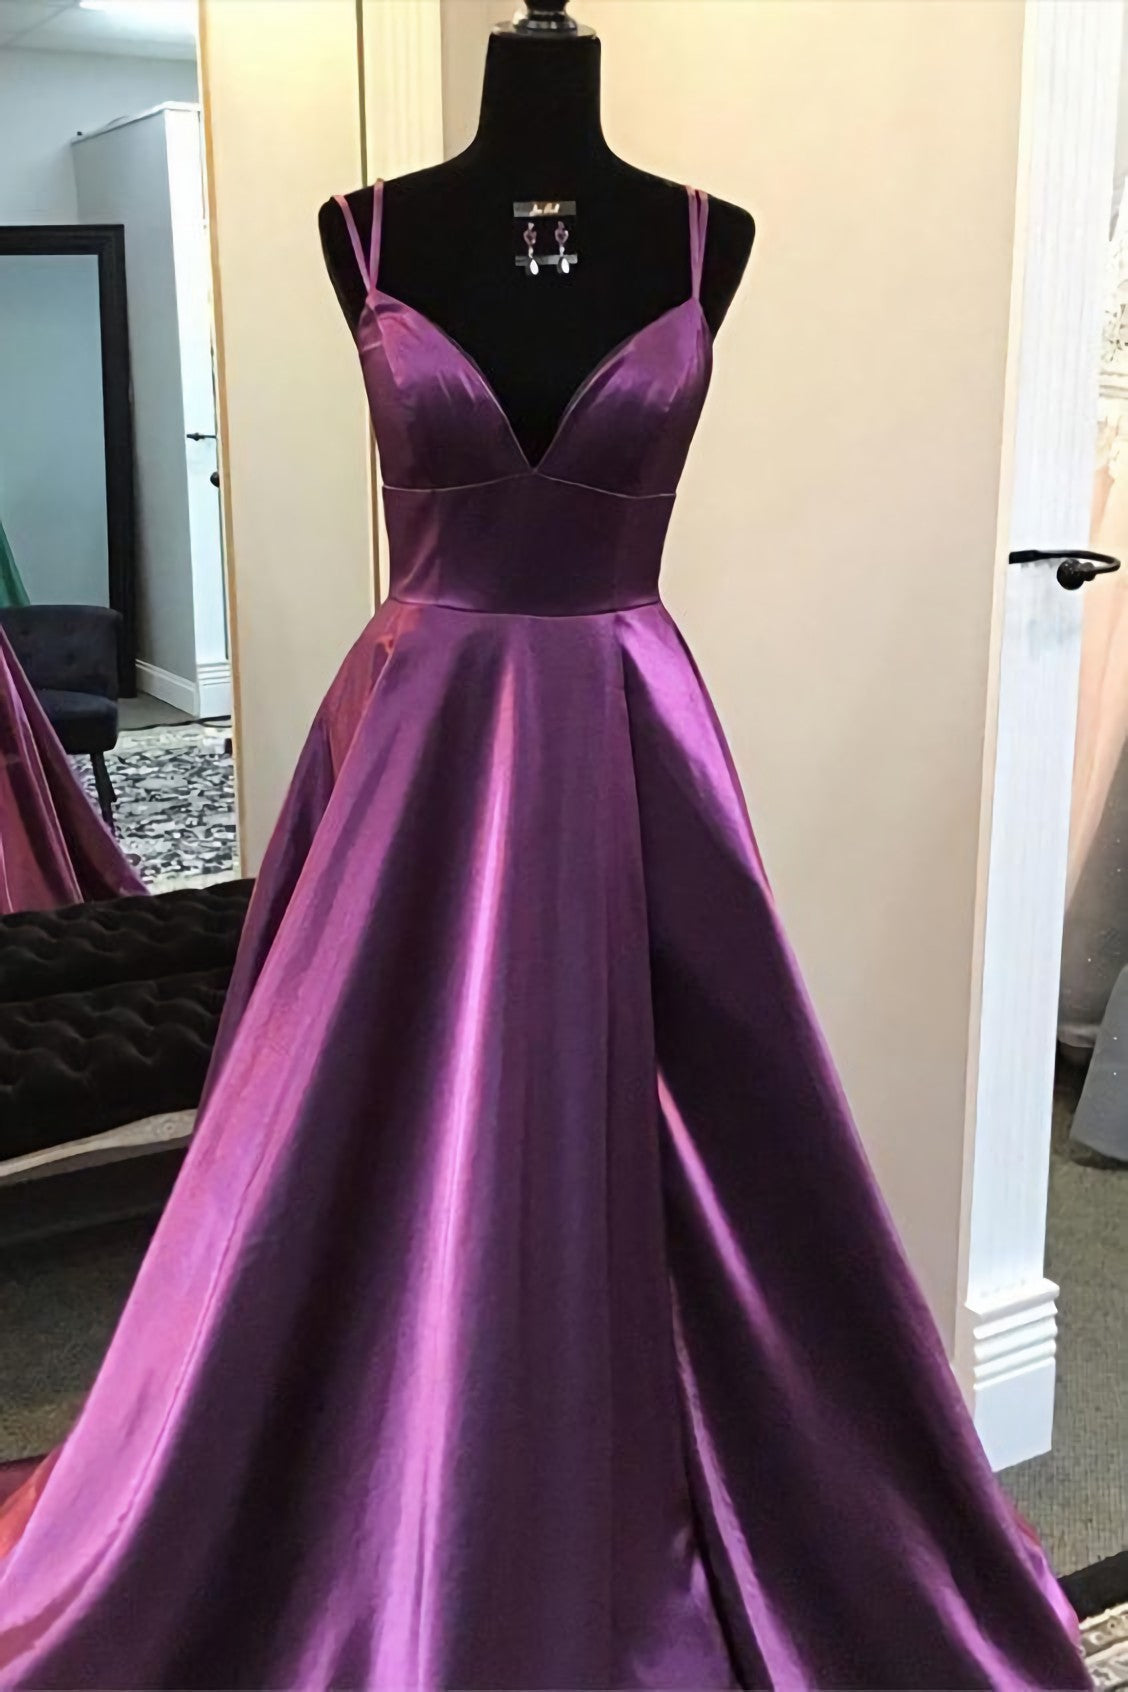 Simply Elegant Purple Corset Prom Dress With Double Straps 2444 Gowns, Formal Dress Elegant Classy